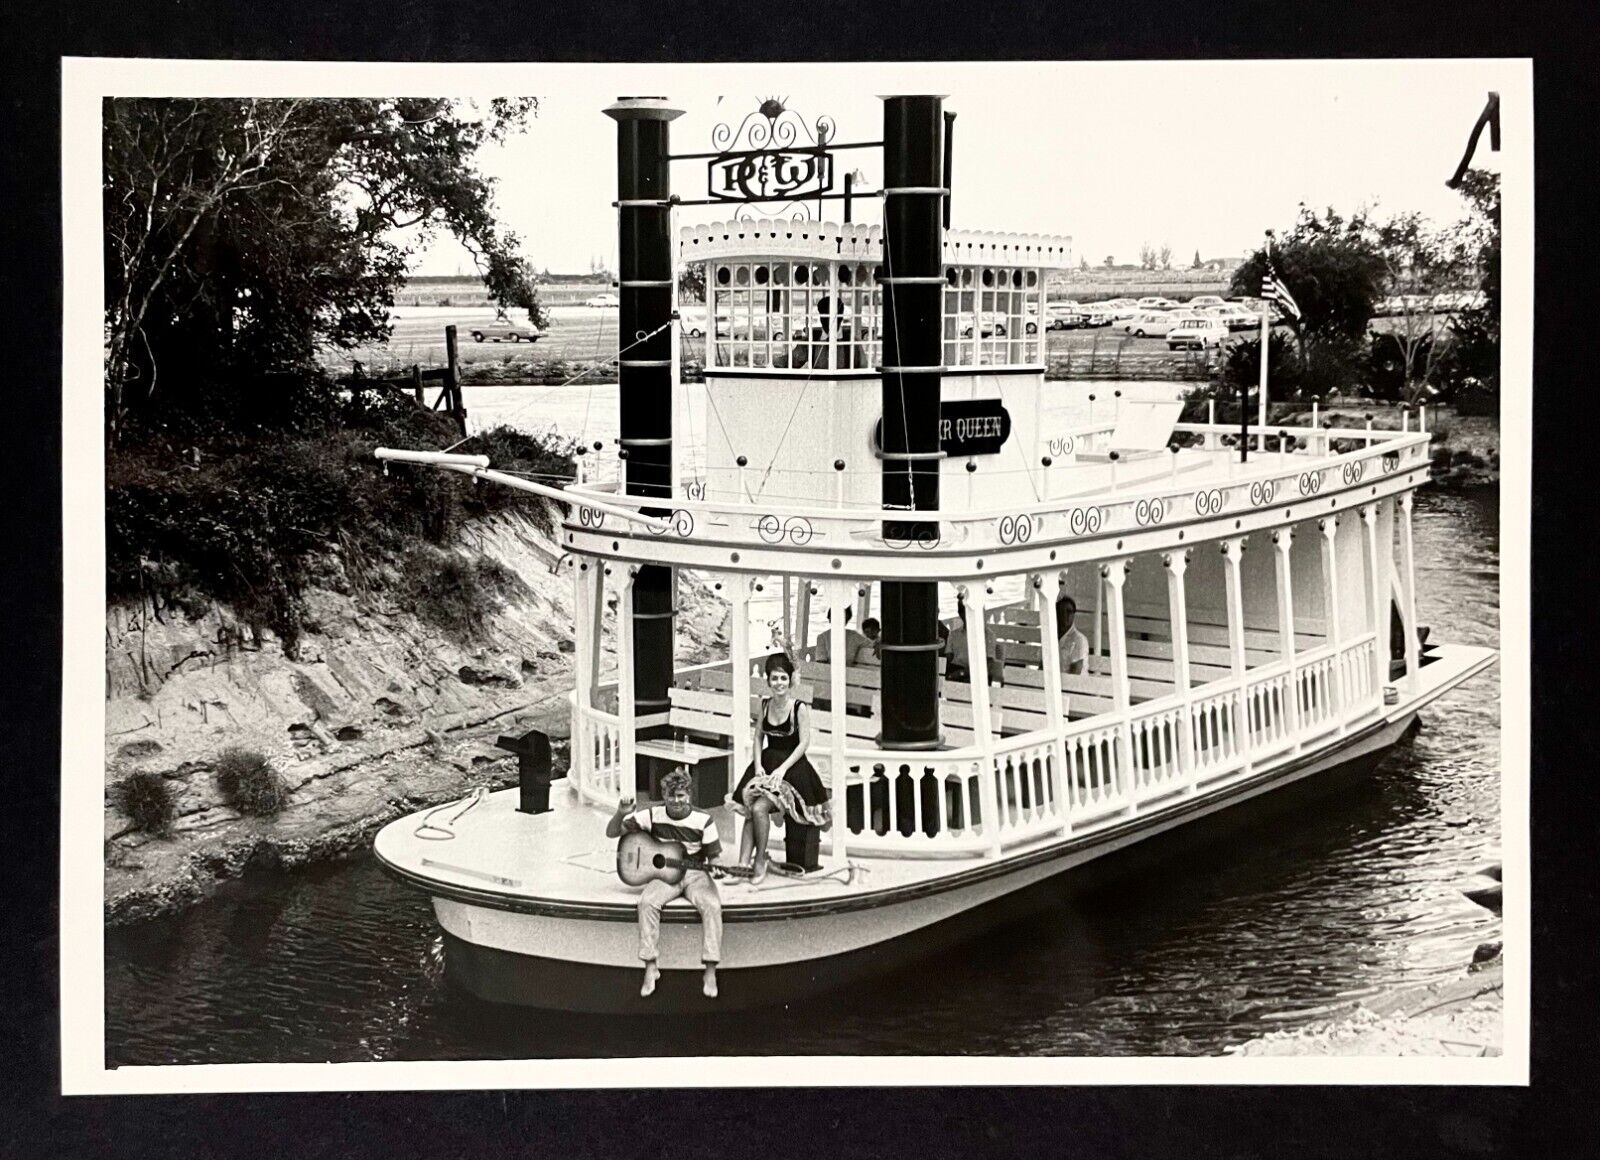 1967 Pioneer Queen Ferry Boat Ferryboat River Cruise Guitar Lady Vintage Photo